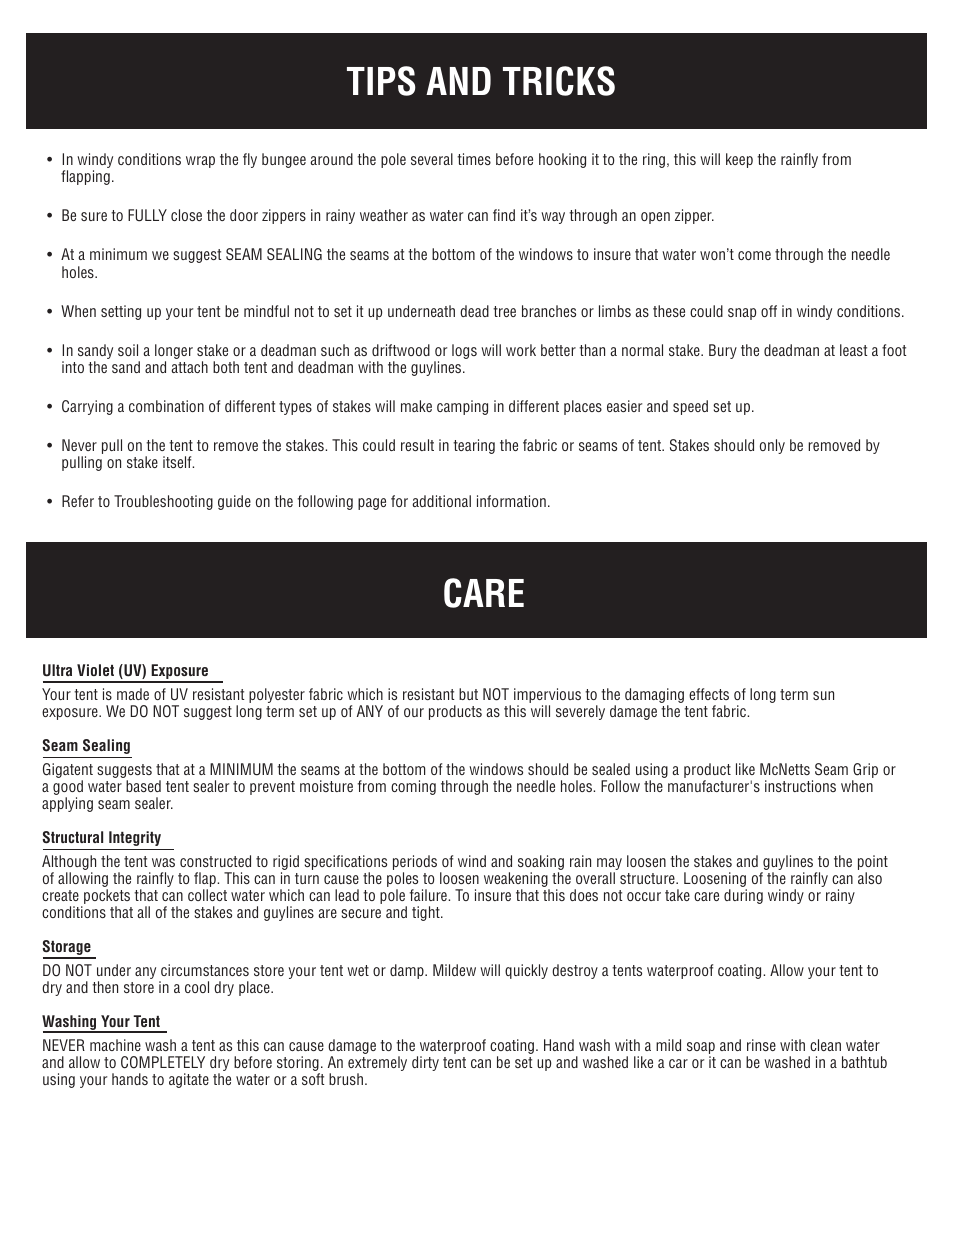 Tips and tricks care | Giga Tent FT 004 User Manual | Page 5 / 8